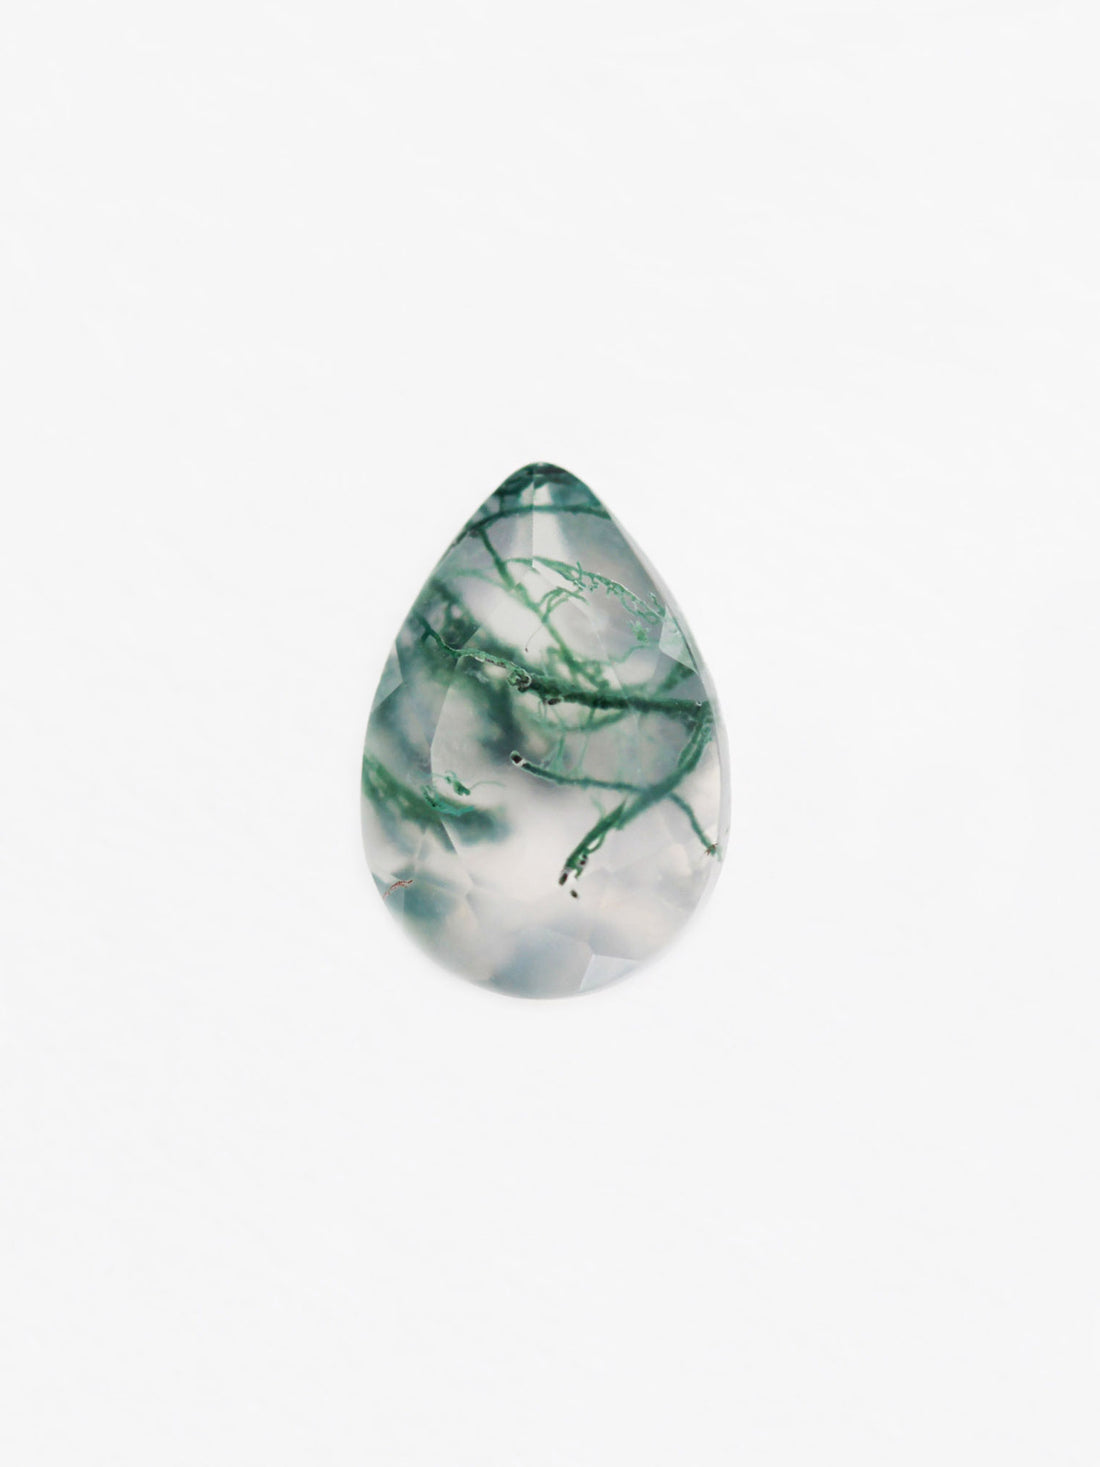 1.11CT Moss Agate Inventory SKU MAPEAR-01